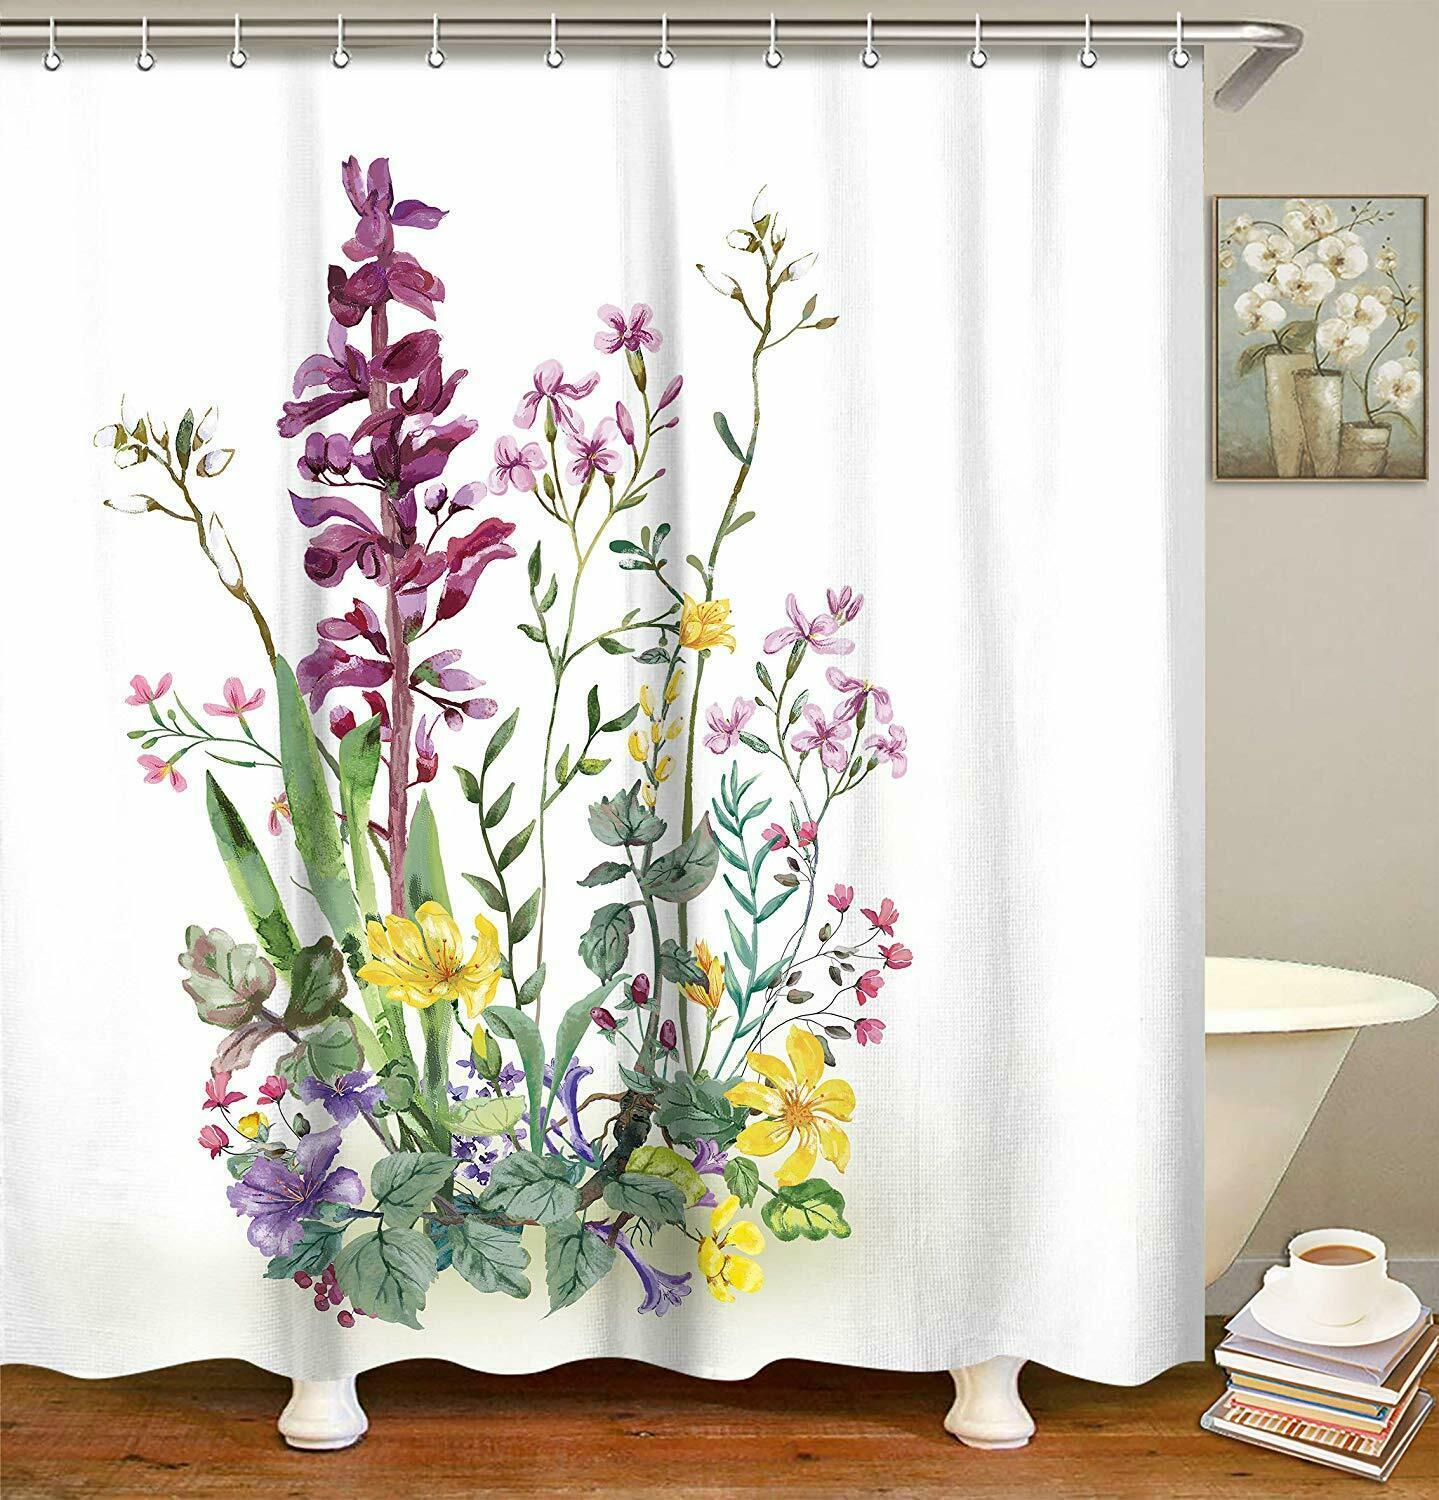 Beautiful Floral Farmhouse Rustic Watercolor Colorful Fabric Shower Curtain Shower Curtains